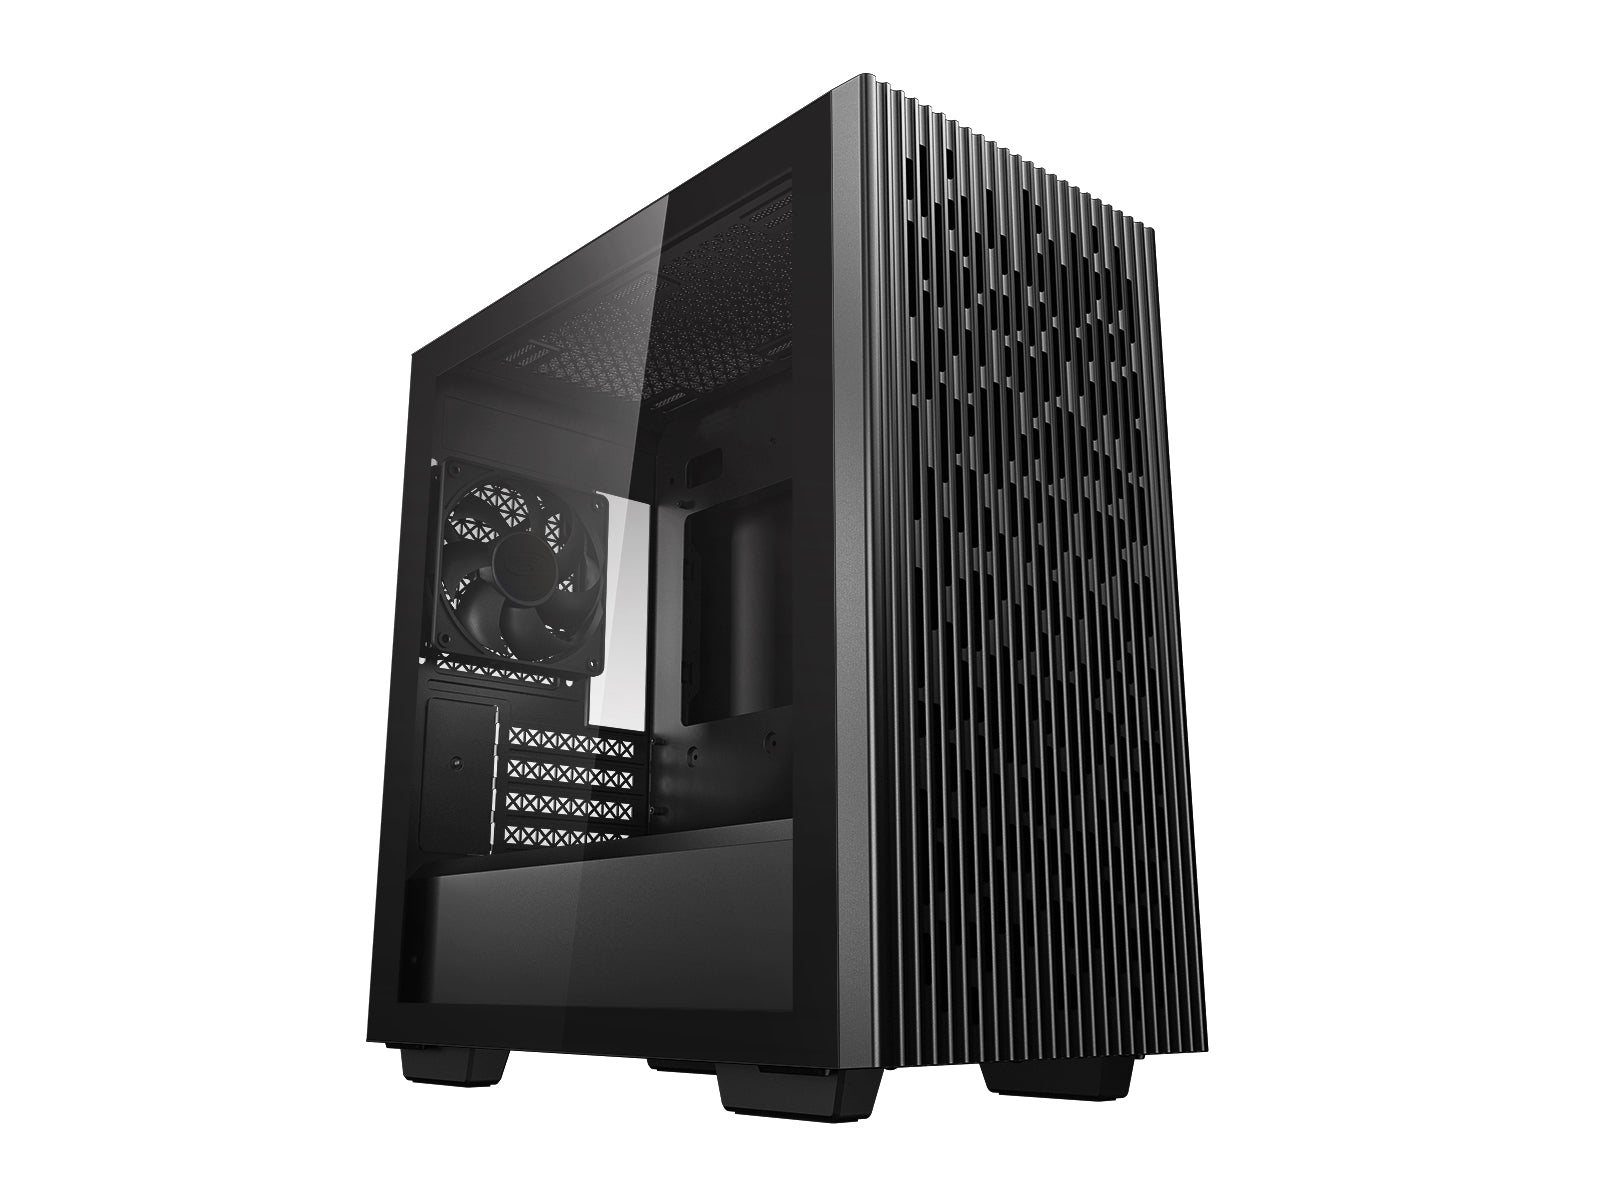 deepcool-matrexx-40-mini-itx-micro-atx-case-tempered-glass-side-panel-mesh-top-and-front-1x-pre-installed-fan-removable-drive-cage-black